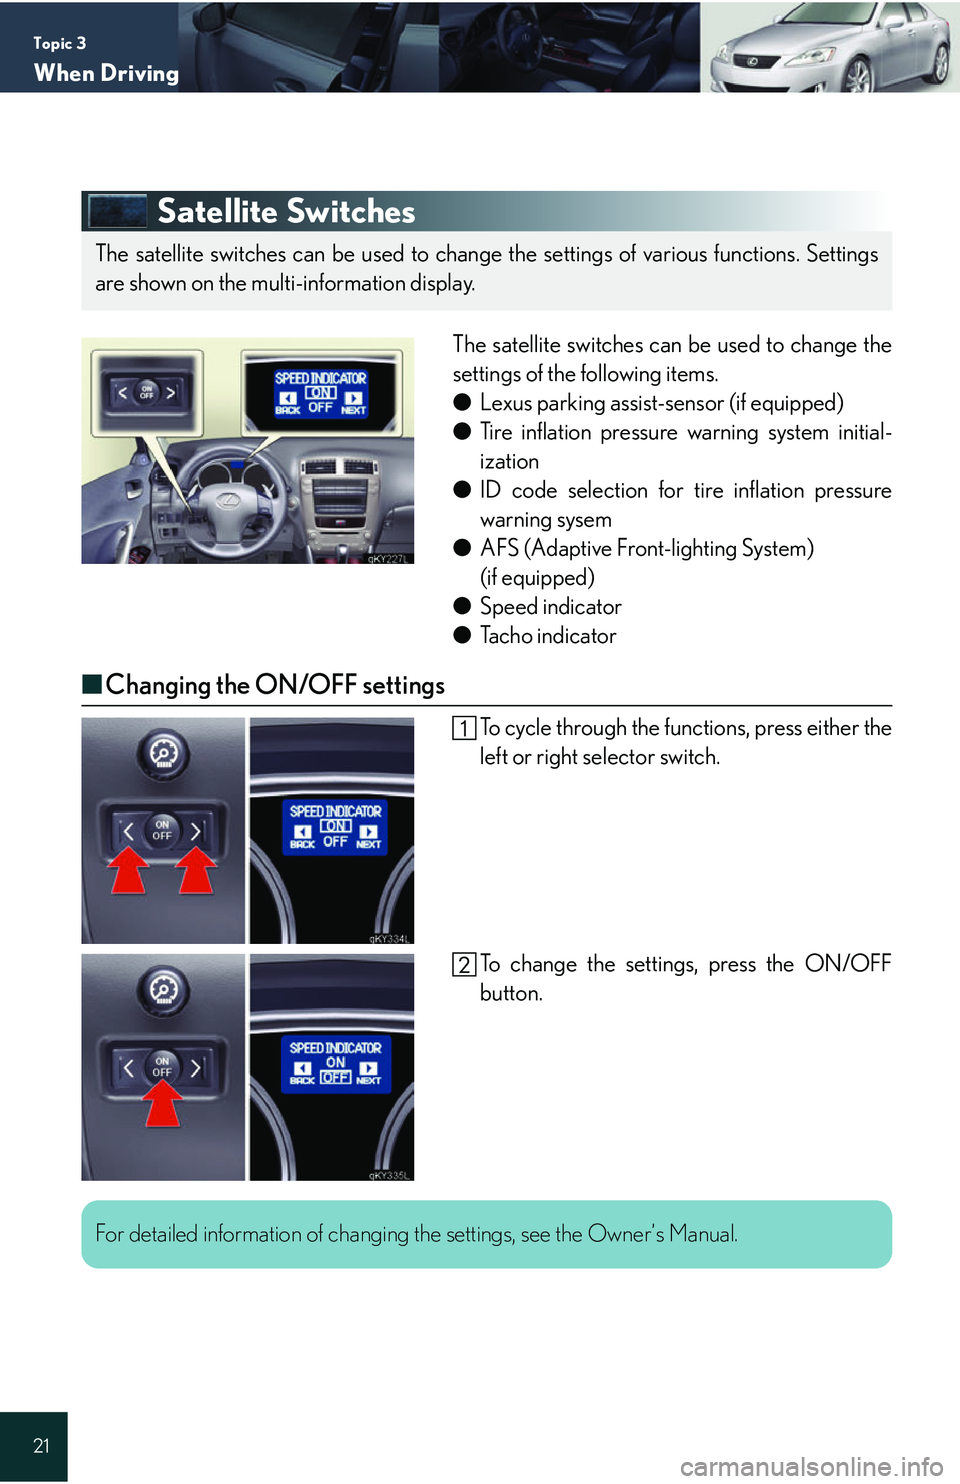 Lexus IS250 2006  Do-it-yourself maintenance / LEXUS 2006 IS350/250 QUICK REFERENCE GUIDE Topic 3
When Driving
21
Satellite Switches
The satellite switches can be used to change the
settings of the following items.
● Lexus parking assist-sensor (if equipped)
● Tire inflation pressure w